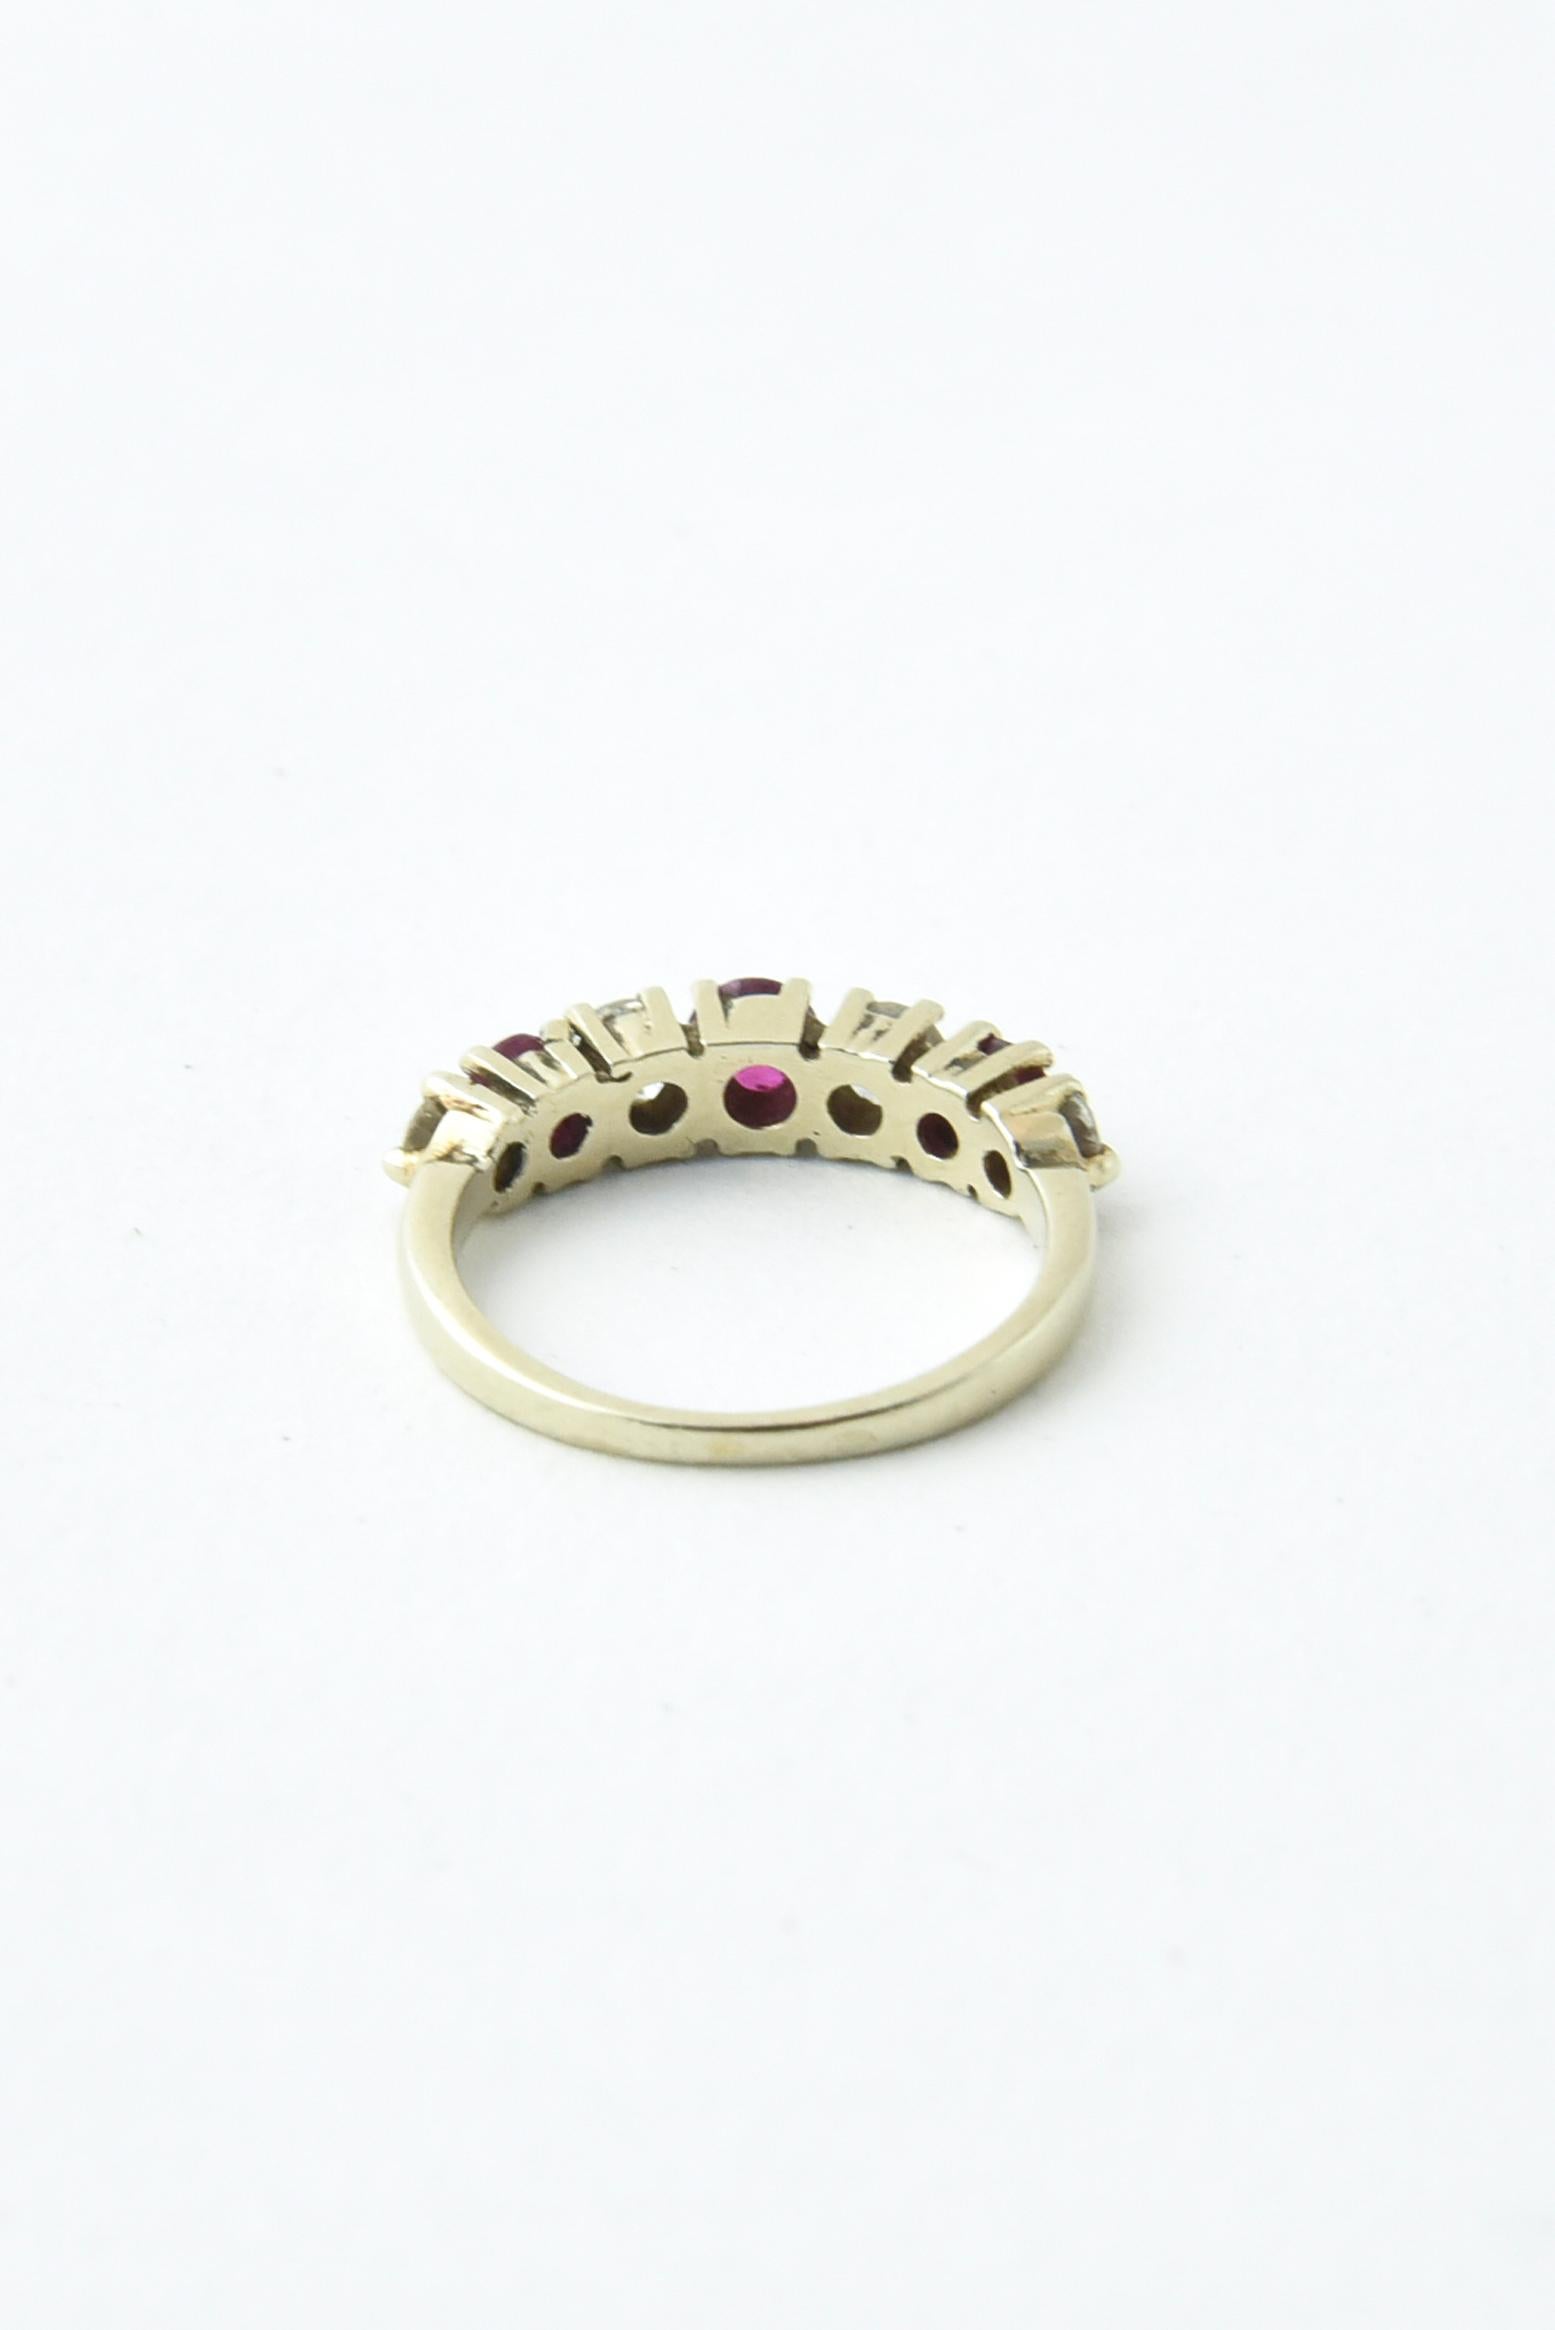 Seven-Stone Diamond and Ruby Band Ring For Sale 1